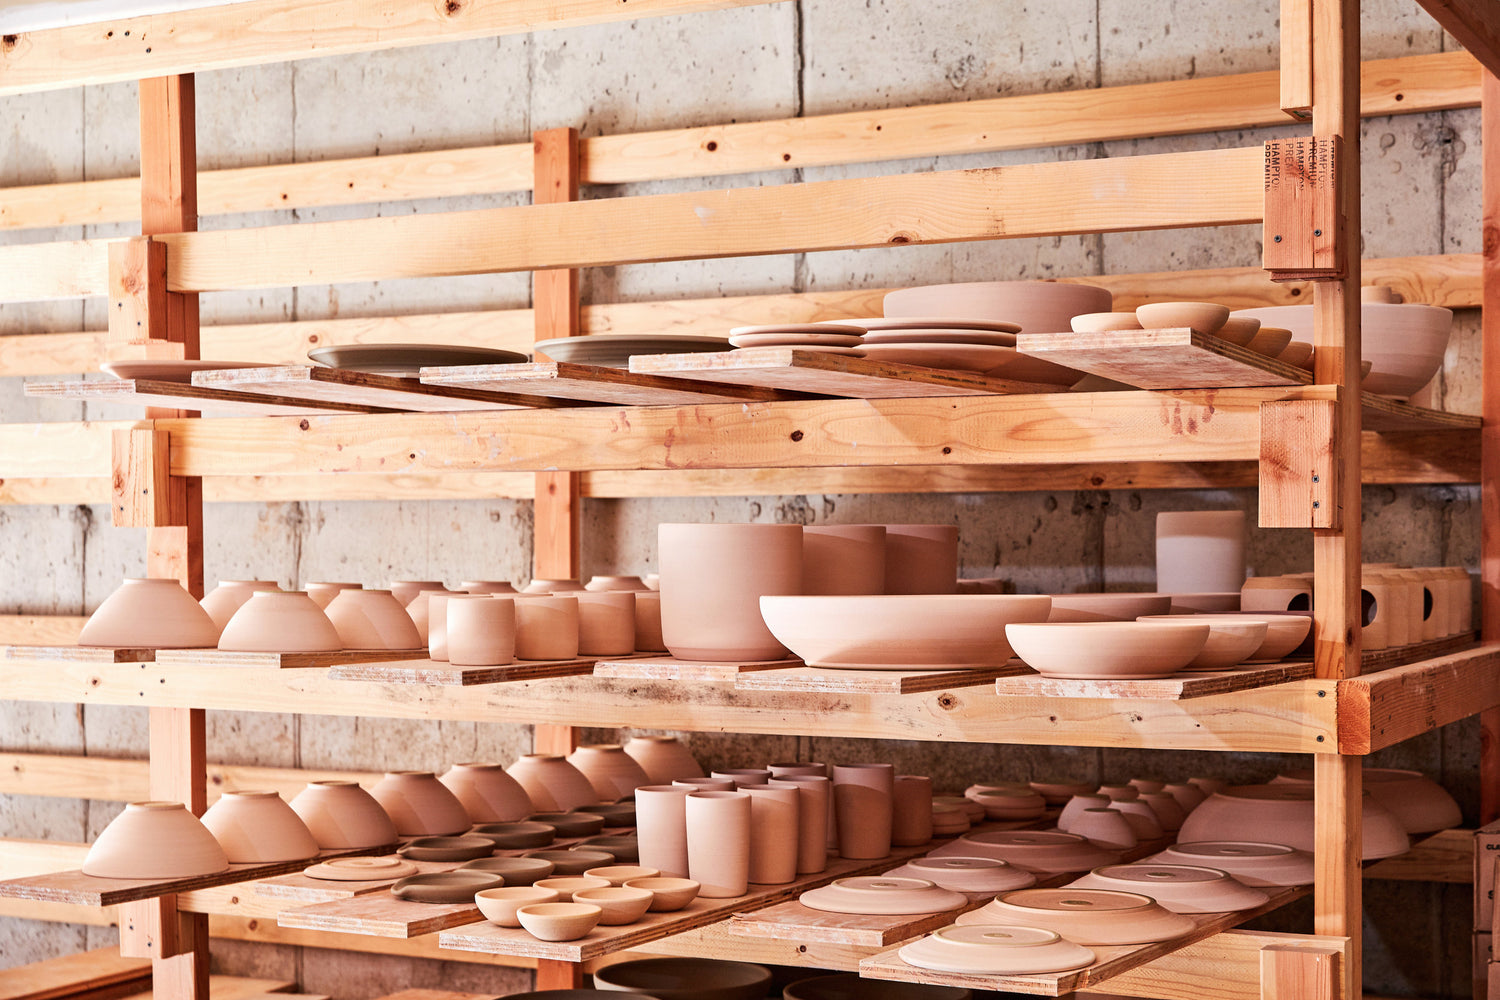 Stoneware and ceramics made by hand, finished with semi-matte, house-mixed glazes by LAIL Design